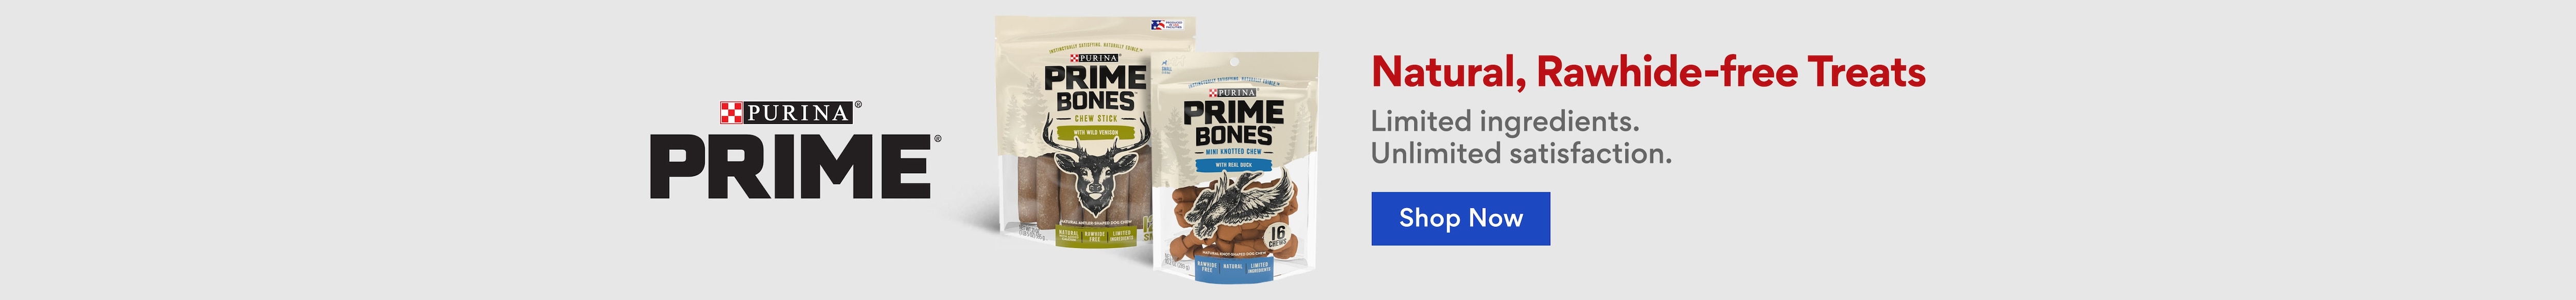 Purina Prime. Natural, Rawhide-free treats. Limited ingredients. Unlimited satisfaction.